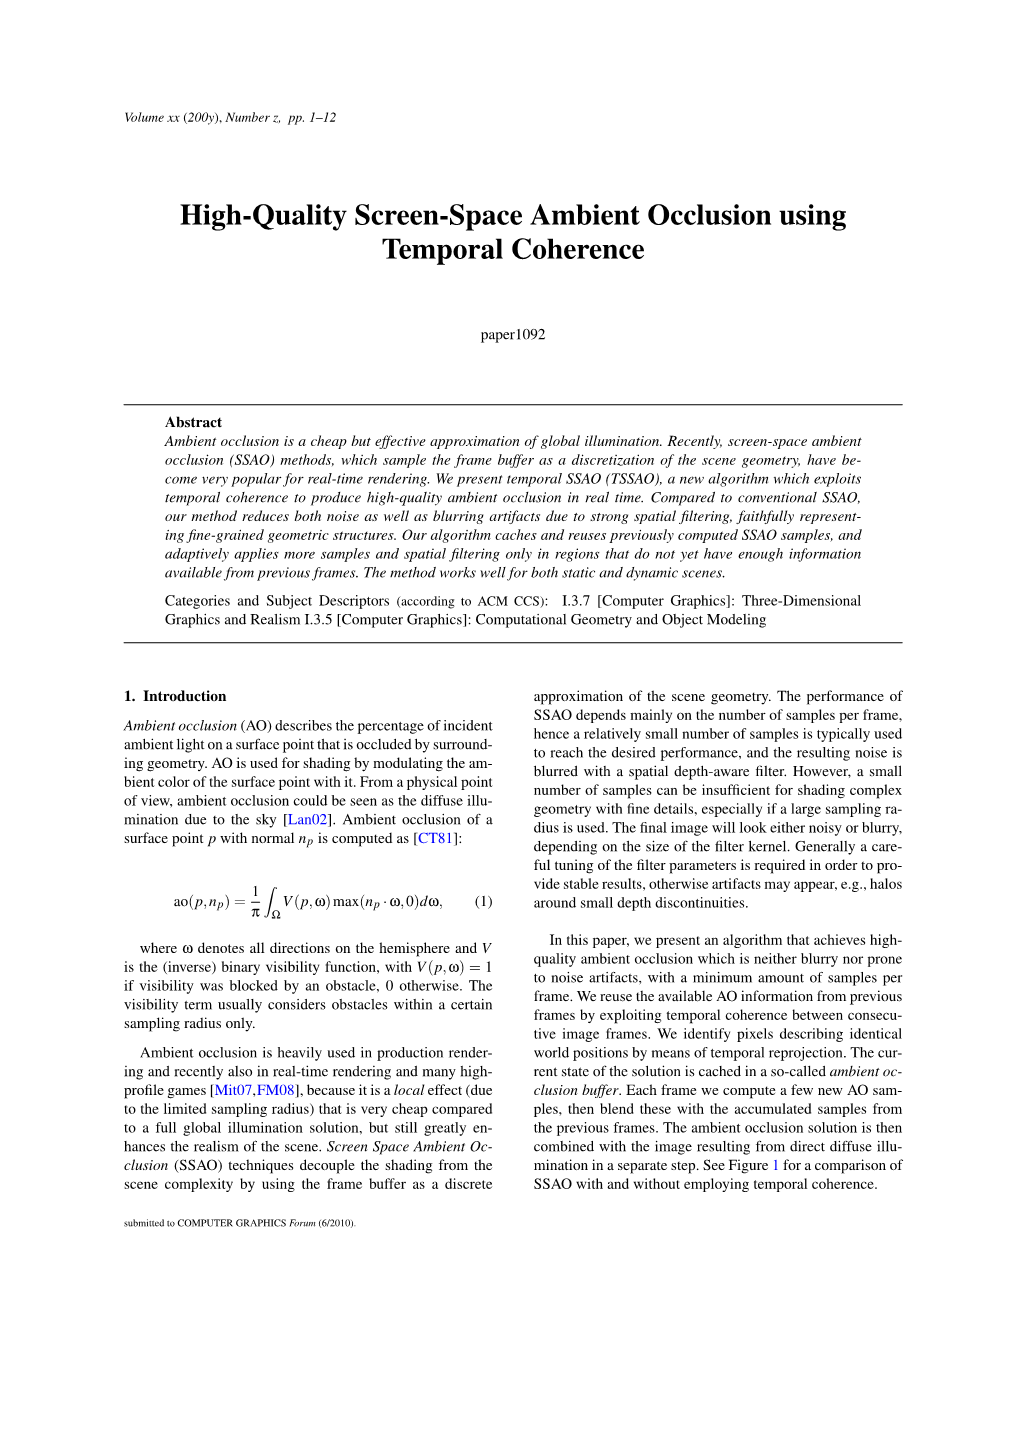 High-Quality Screen-Space Ambient Occlusion Using Temporal Coherence